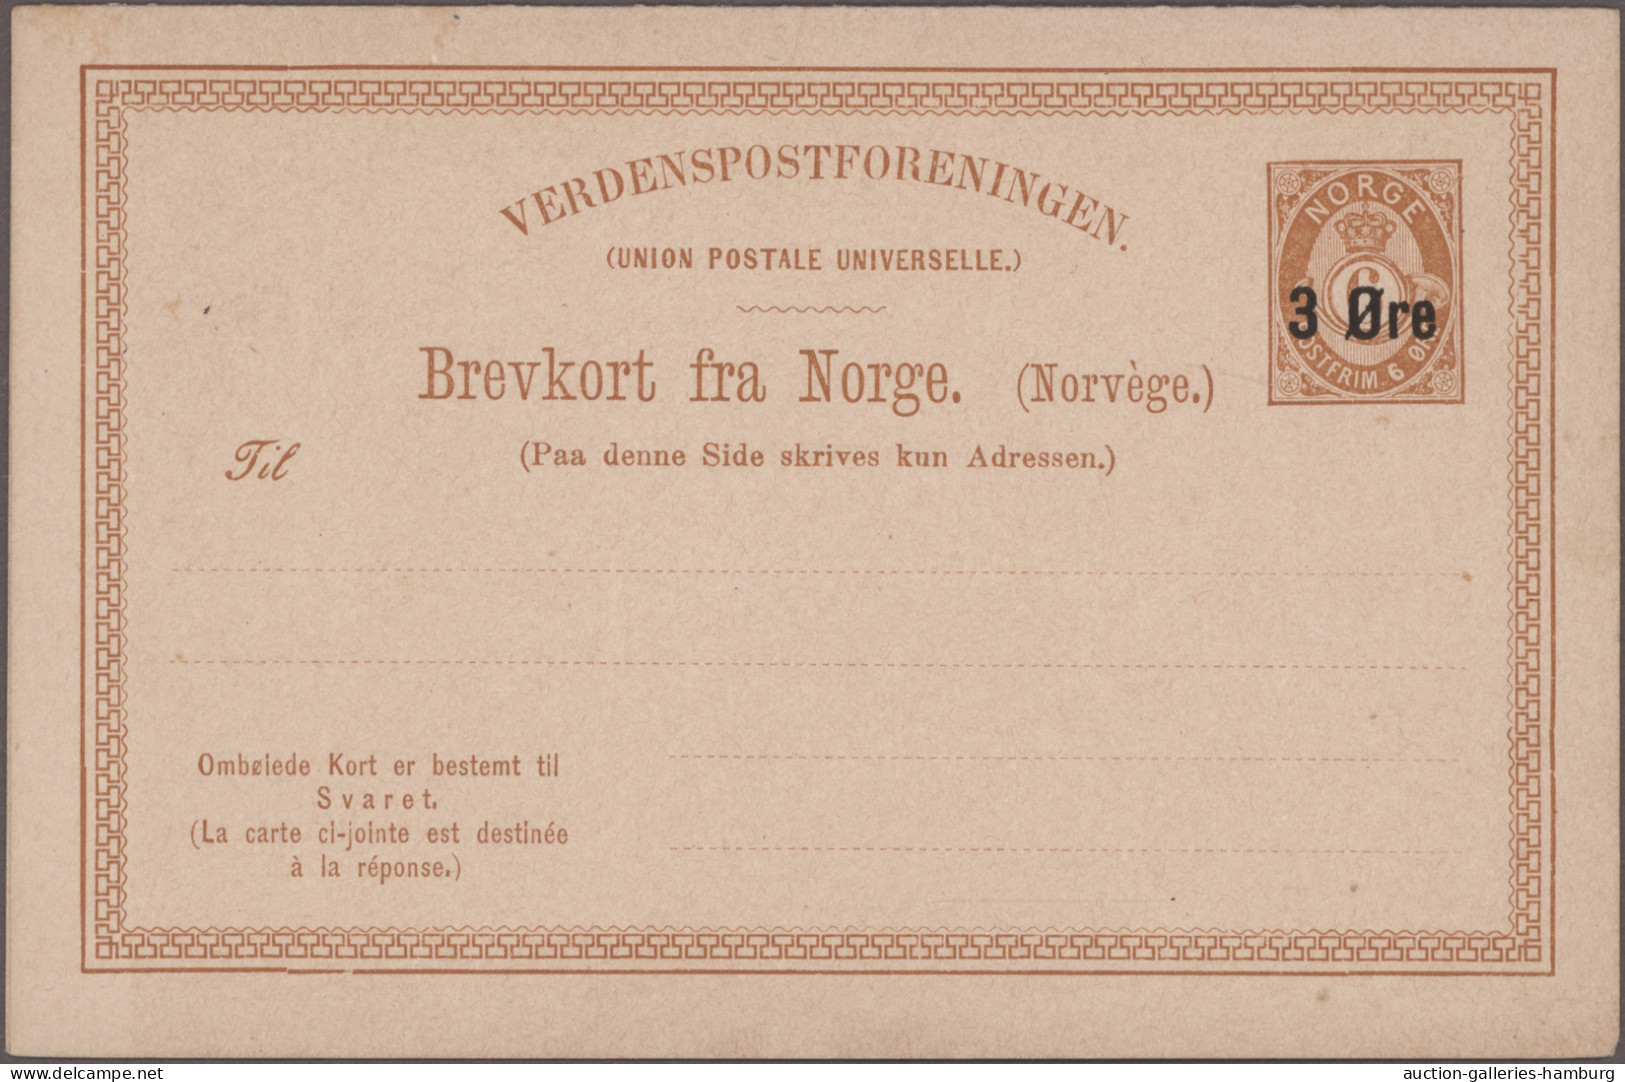 Norway - postal stationery: 1872/1950's Collection of 222 postal stationery card